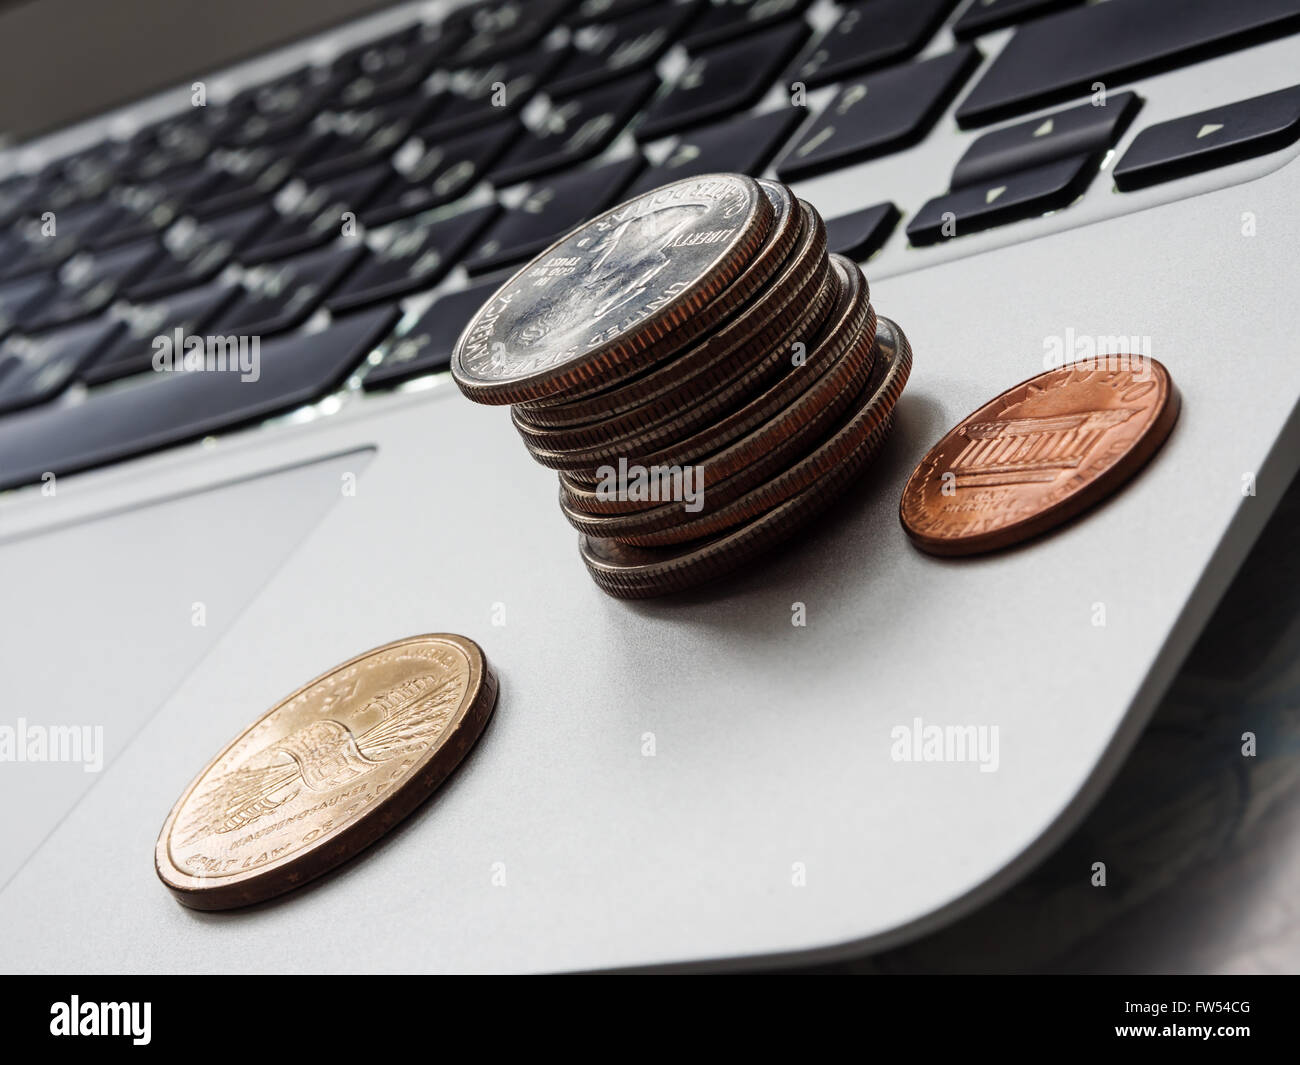 Personal Finance - US coins on a laptop keyboard, shallow depth of field Stock Photo